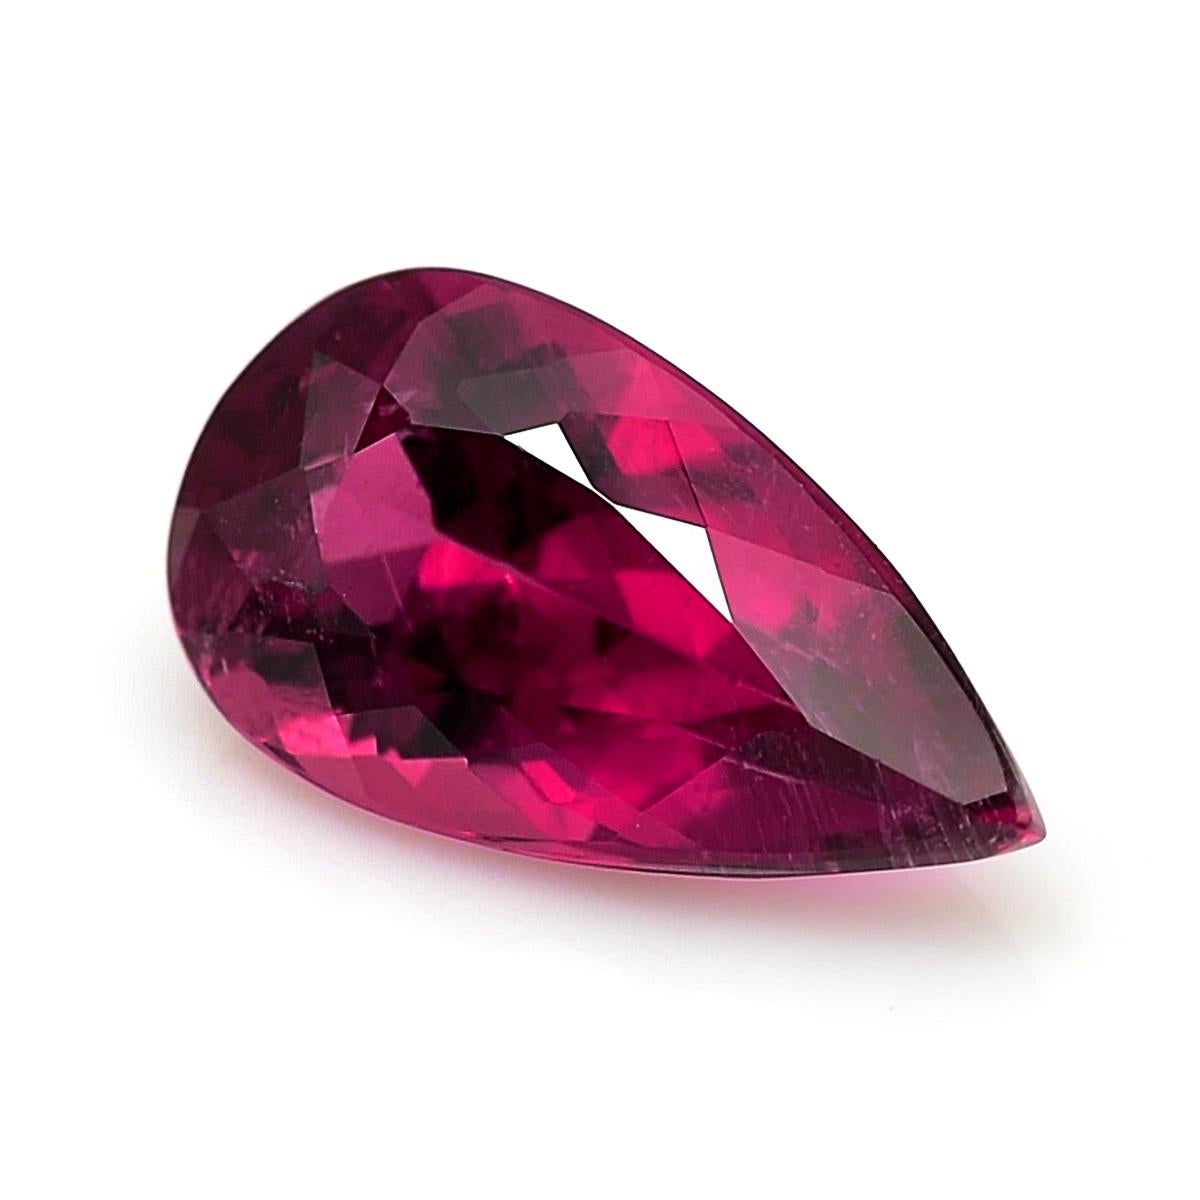 Identification: Natural Rubellite 3.85 carats 

Carat: 3.85 carats
Shape: Pear Shape
Measurements:  14.7 x 8 mm 
Cut: Brilliant/Step
Color: Pink
Clarity: very eye clean

Presenting a captivating natural Rubellite gemstone, weighing 3.85 carats and